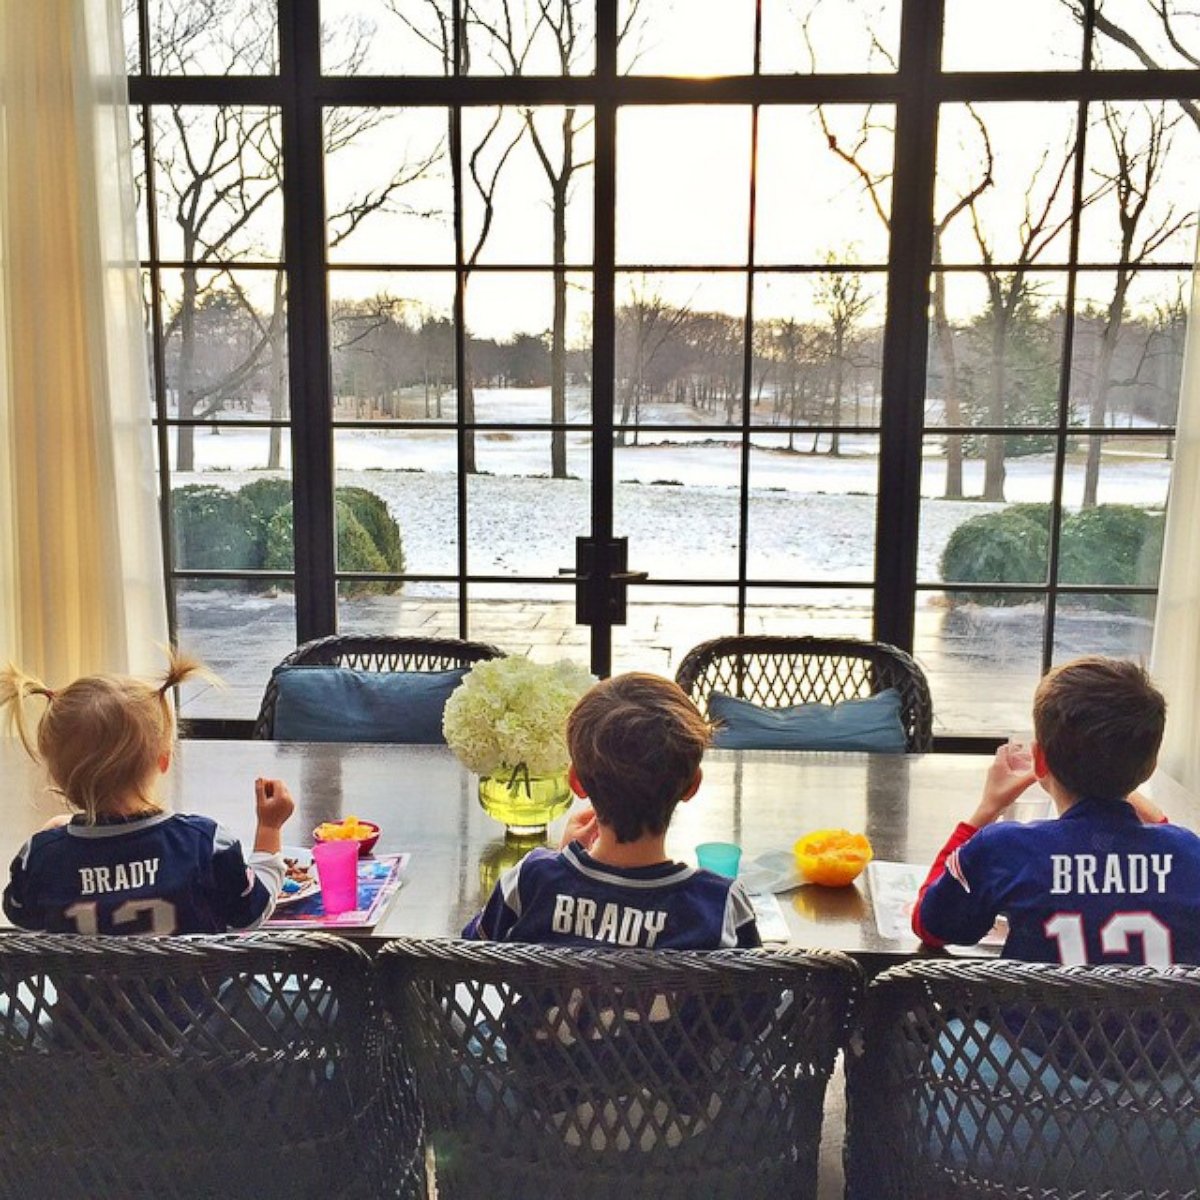 PHOTO: Gisele Bundchen posted this photo to Instagram onJan. 18, 205 with the caption, "We are ready!!! Let's go Daddy! Let's go Pats!!!"